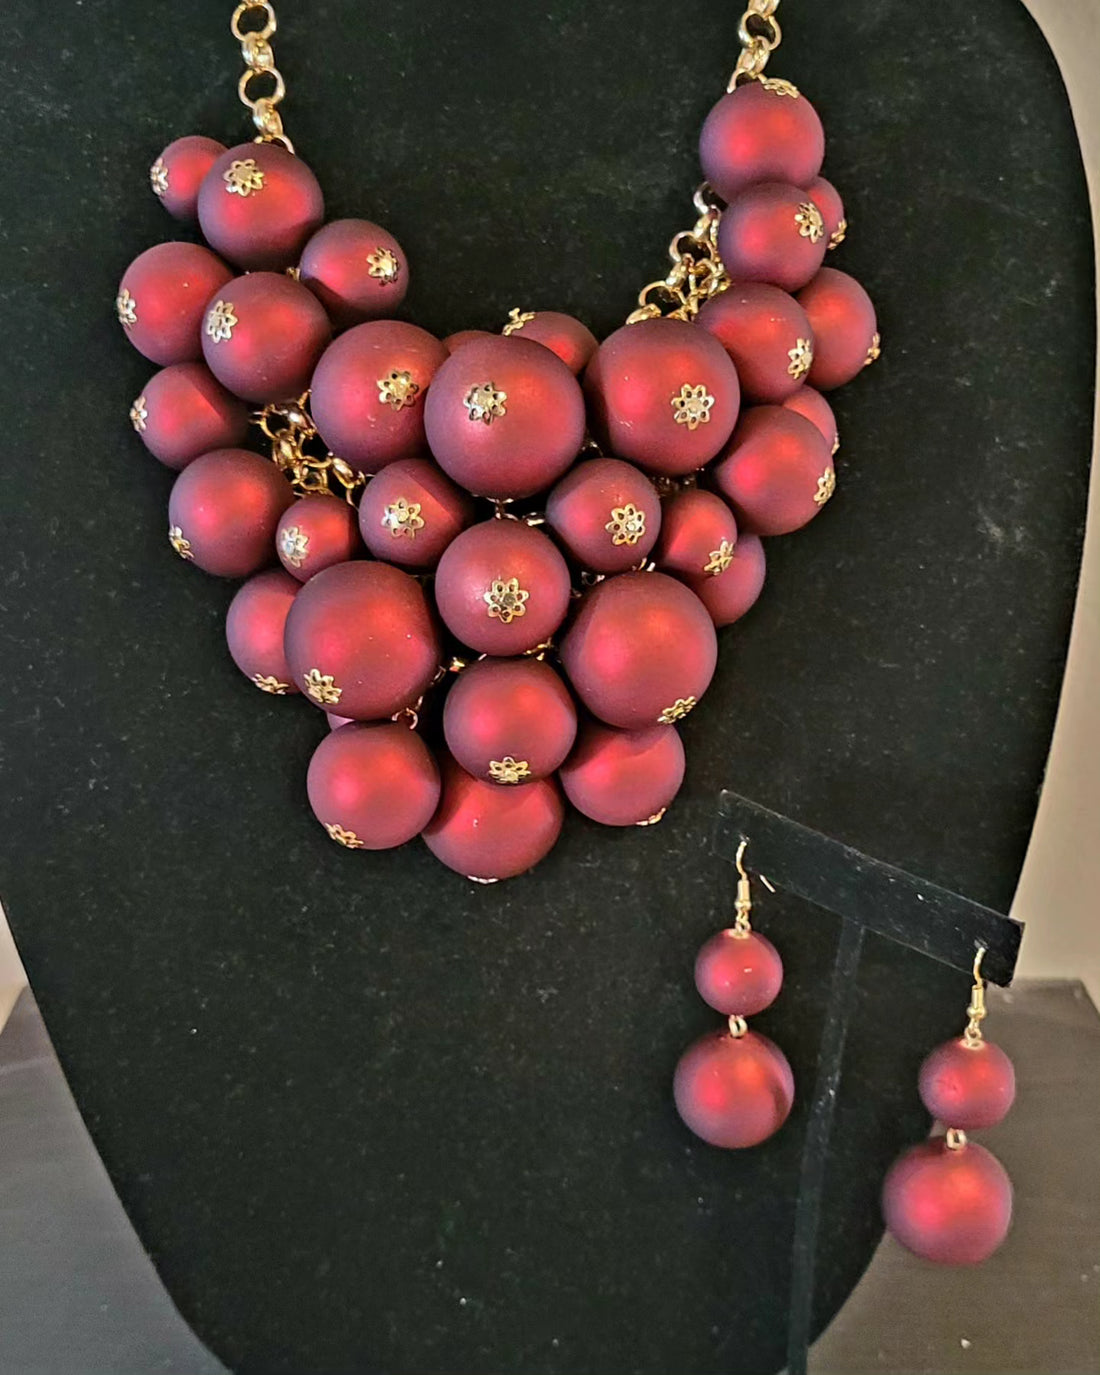 gold tone statement necklace with linked chain, red multi size balls as focal point and matching earrings